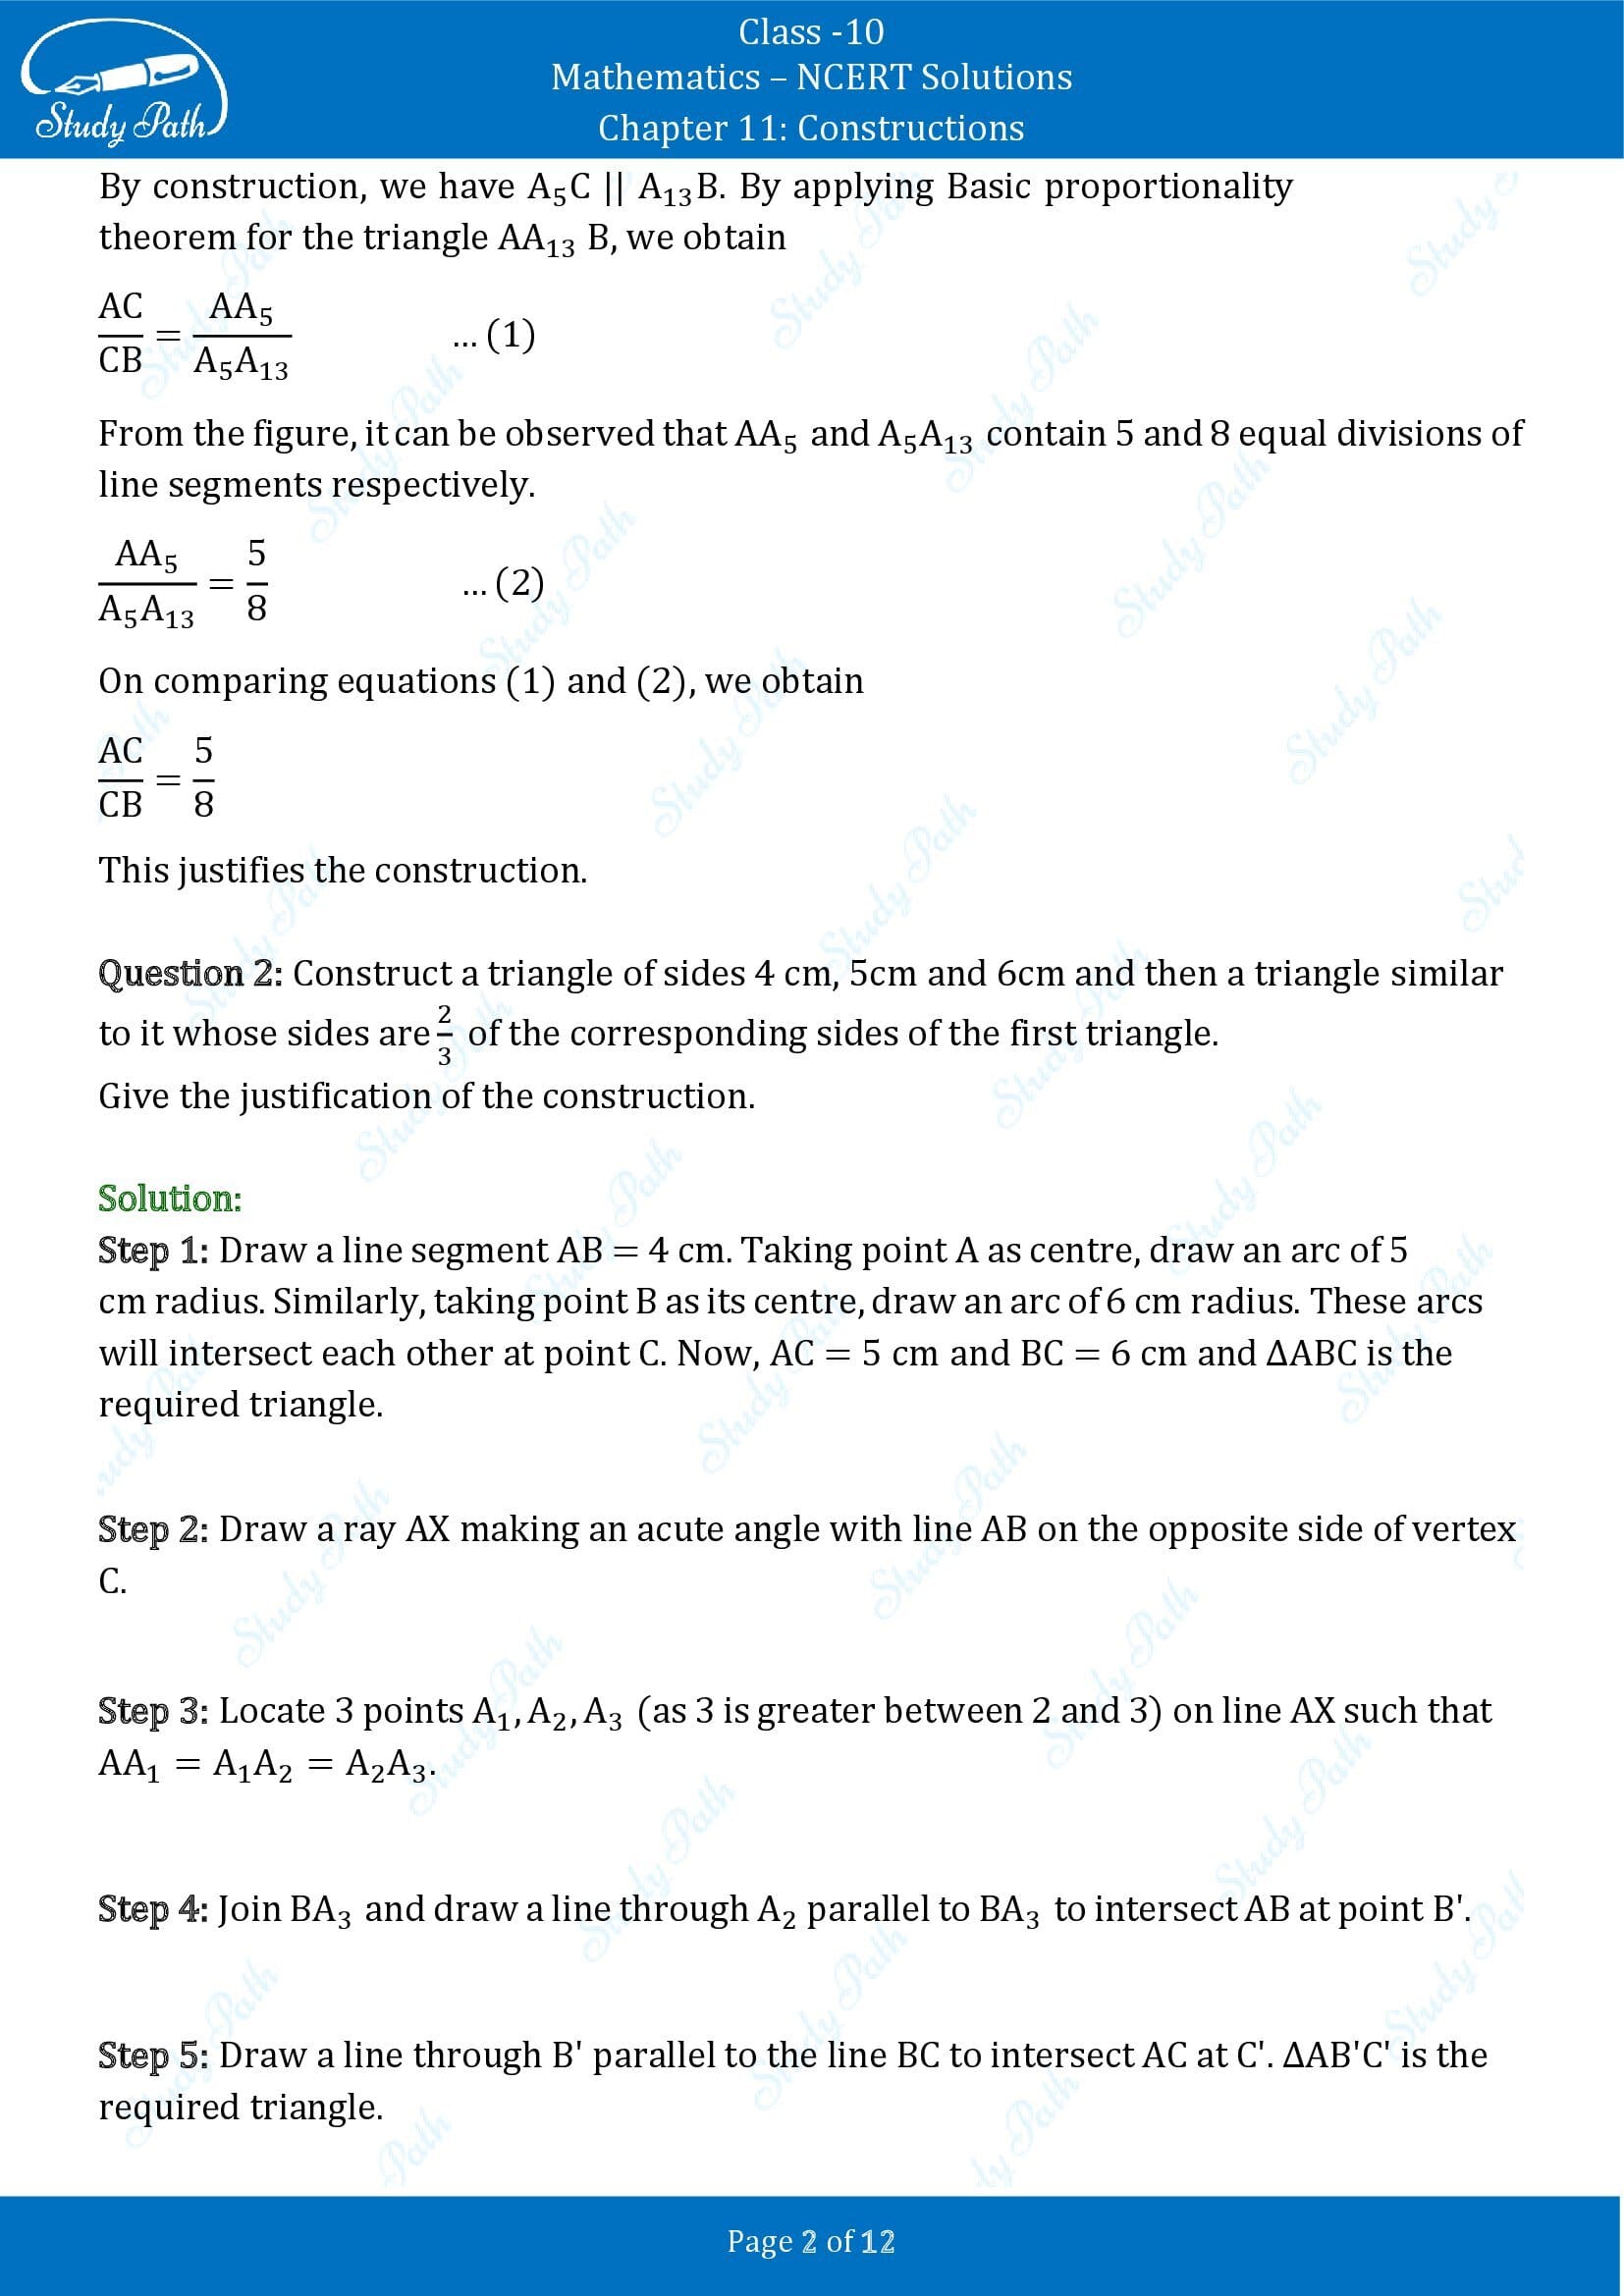 NCERT Solutions for Class 10 Maths Chapter 11 Constructions Exercise 11.1 00002